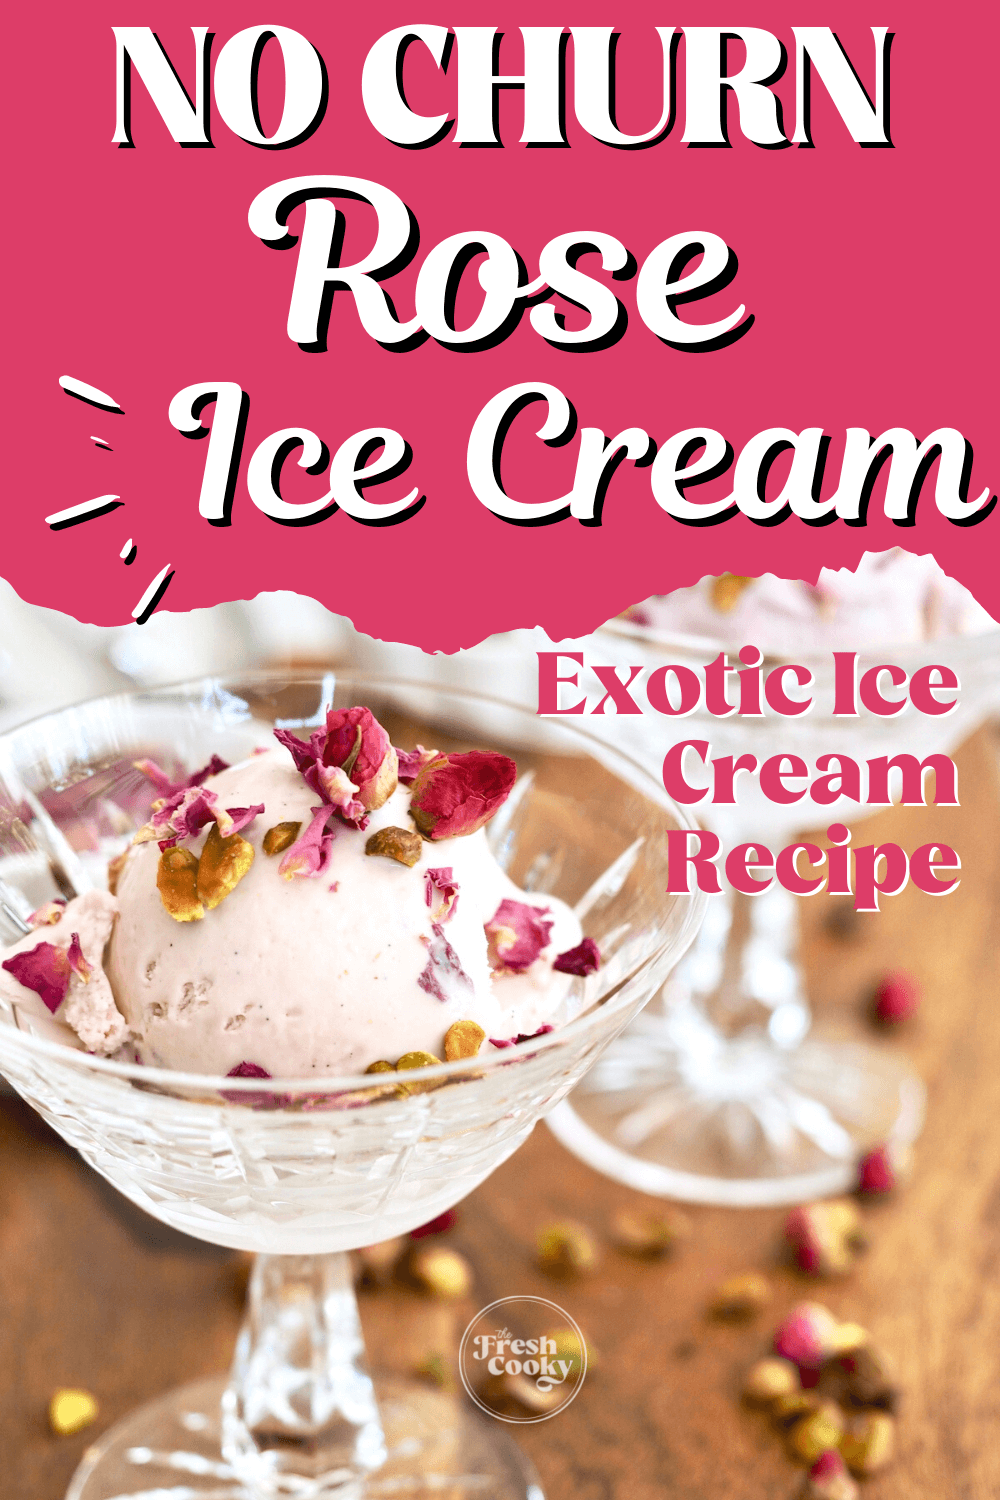 No churn Rose Ice Cream recipe pin with image of two pretty glasses filled with a scoop of rose ice cream topped with rose petals and chopped pistachios.